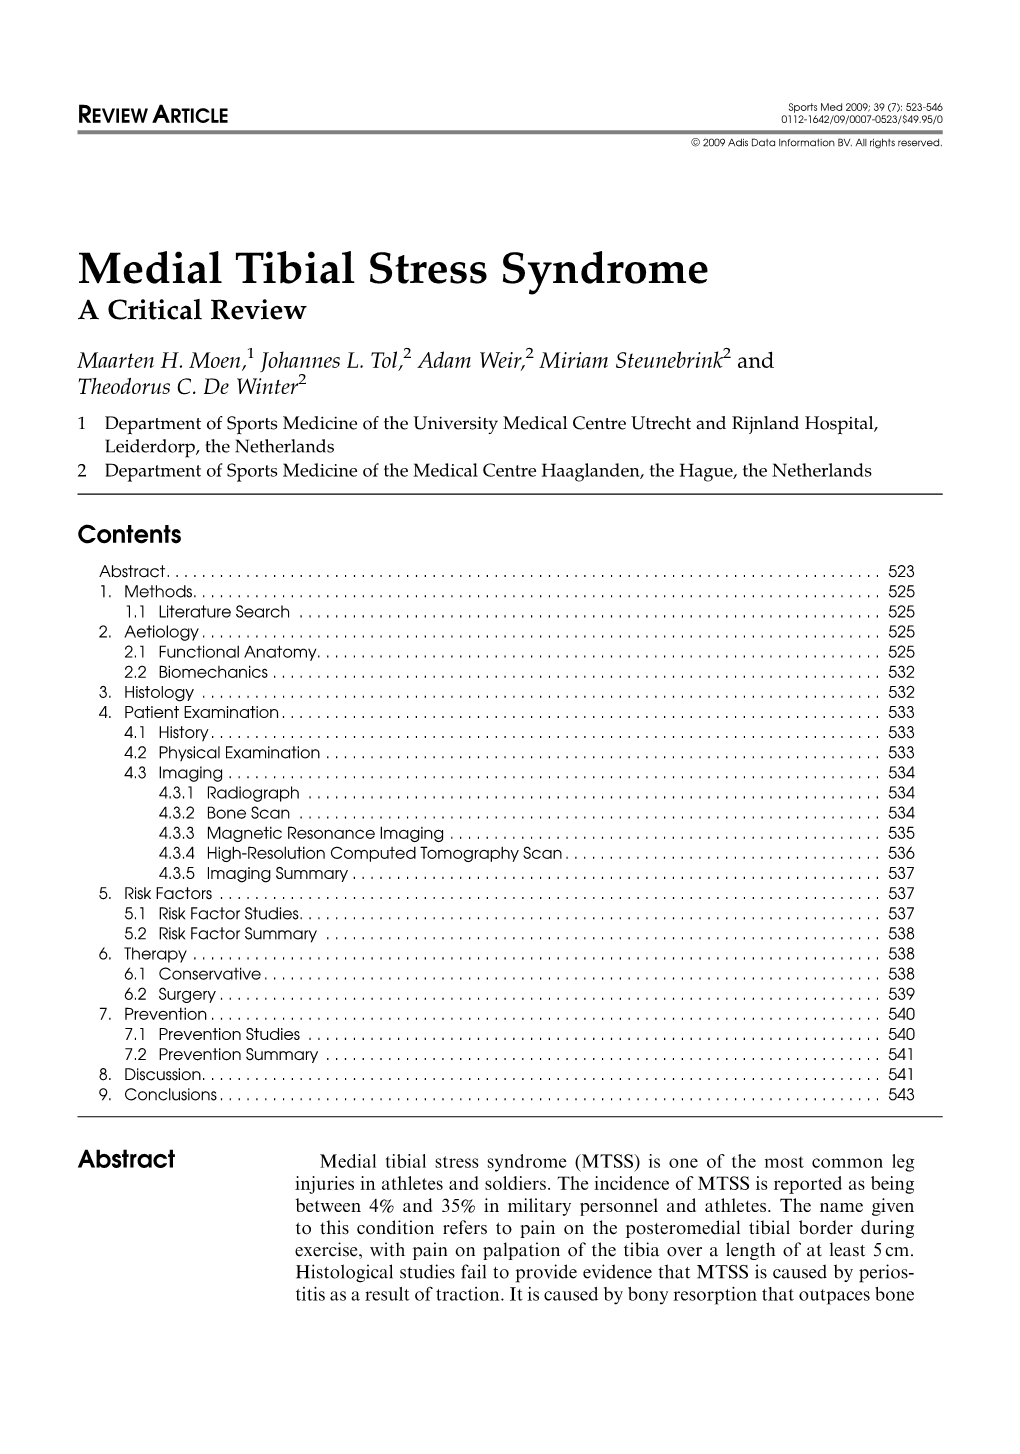 Medial Tibial Stress Syndrome a Critical Review